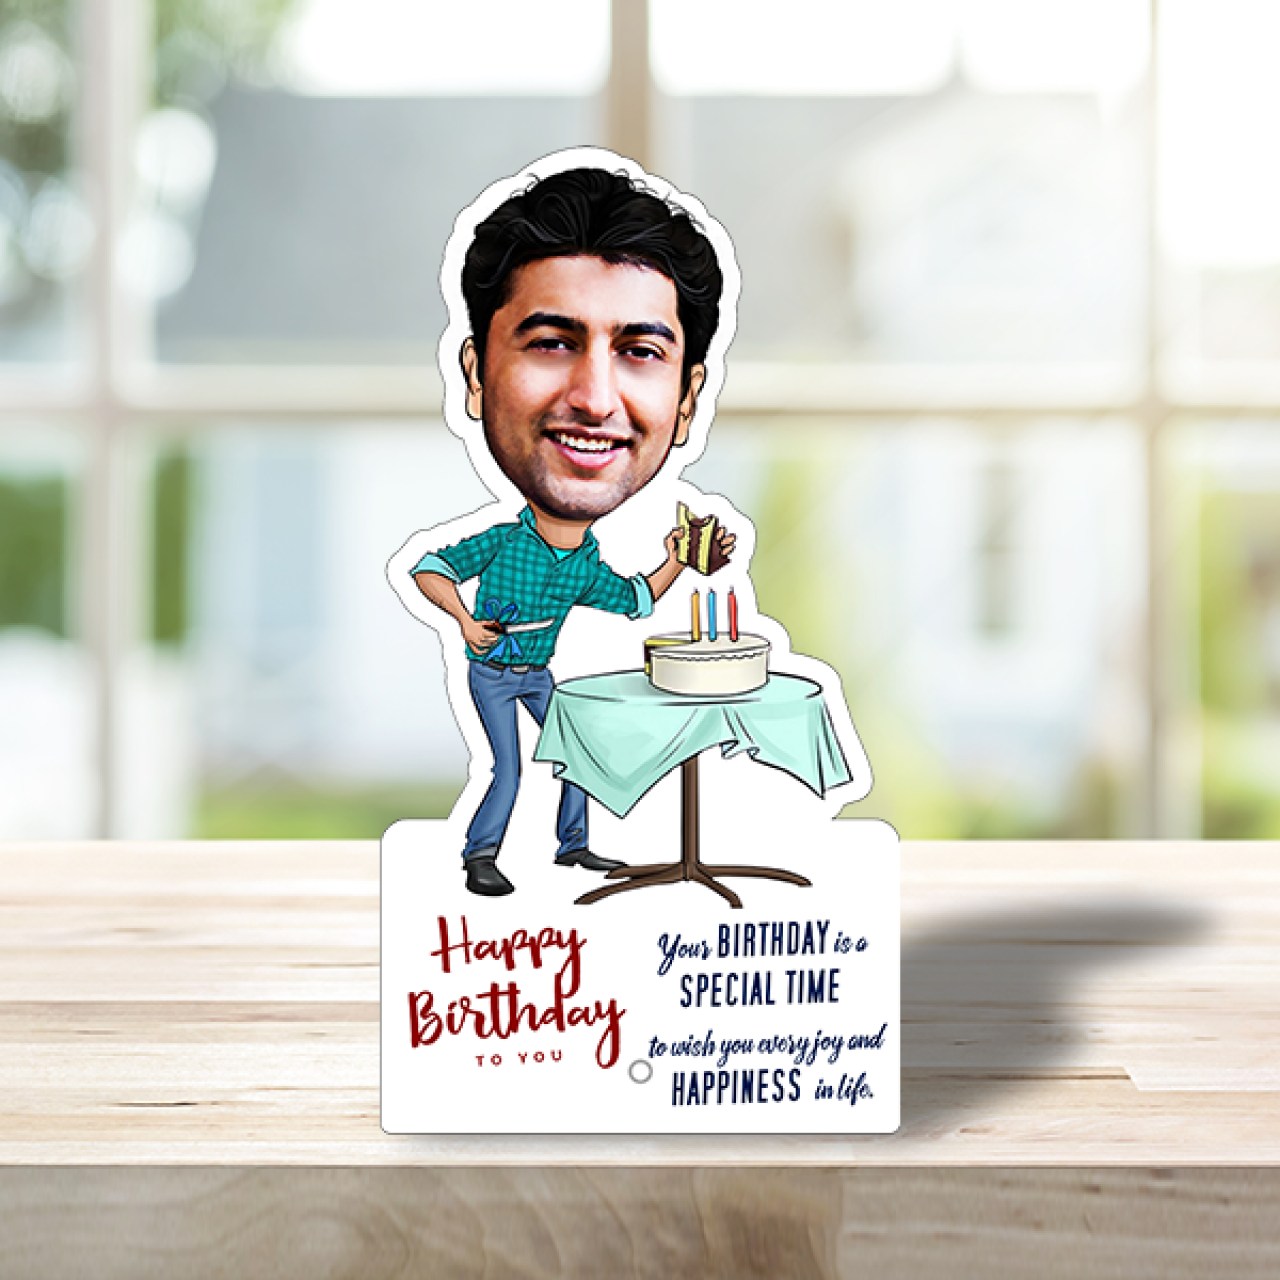 Customized birthday boy caricature with message